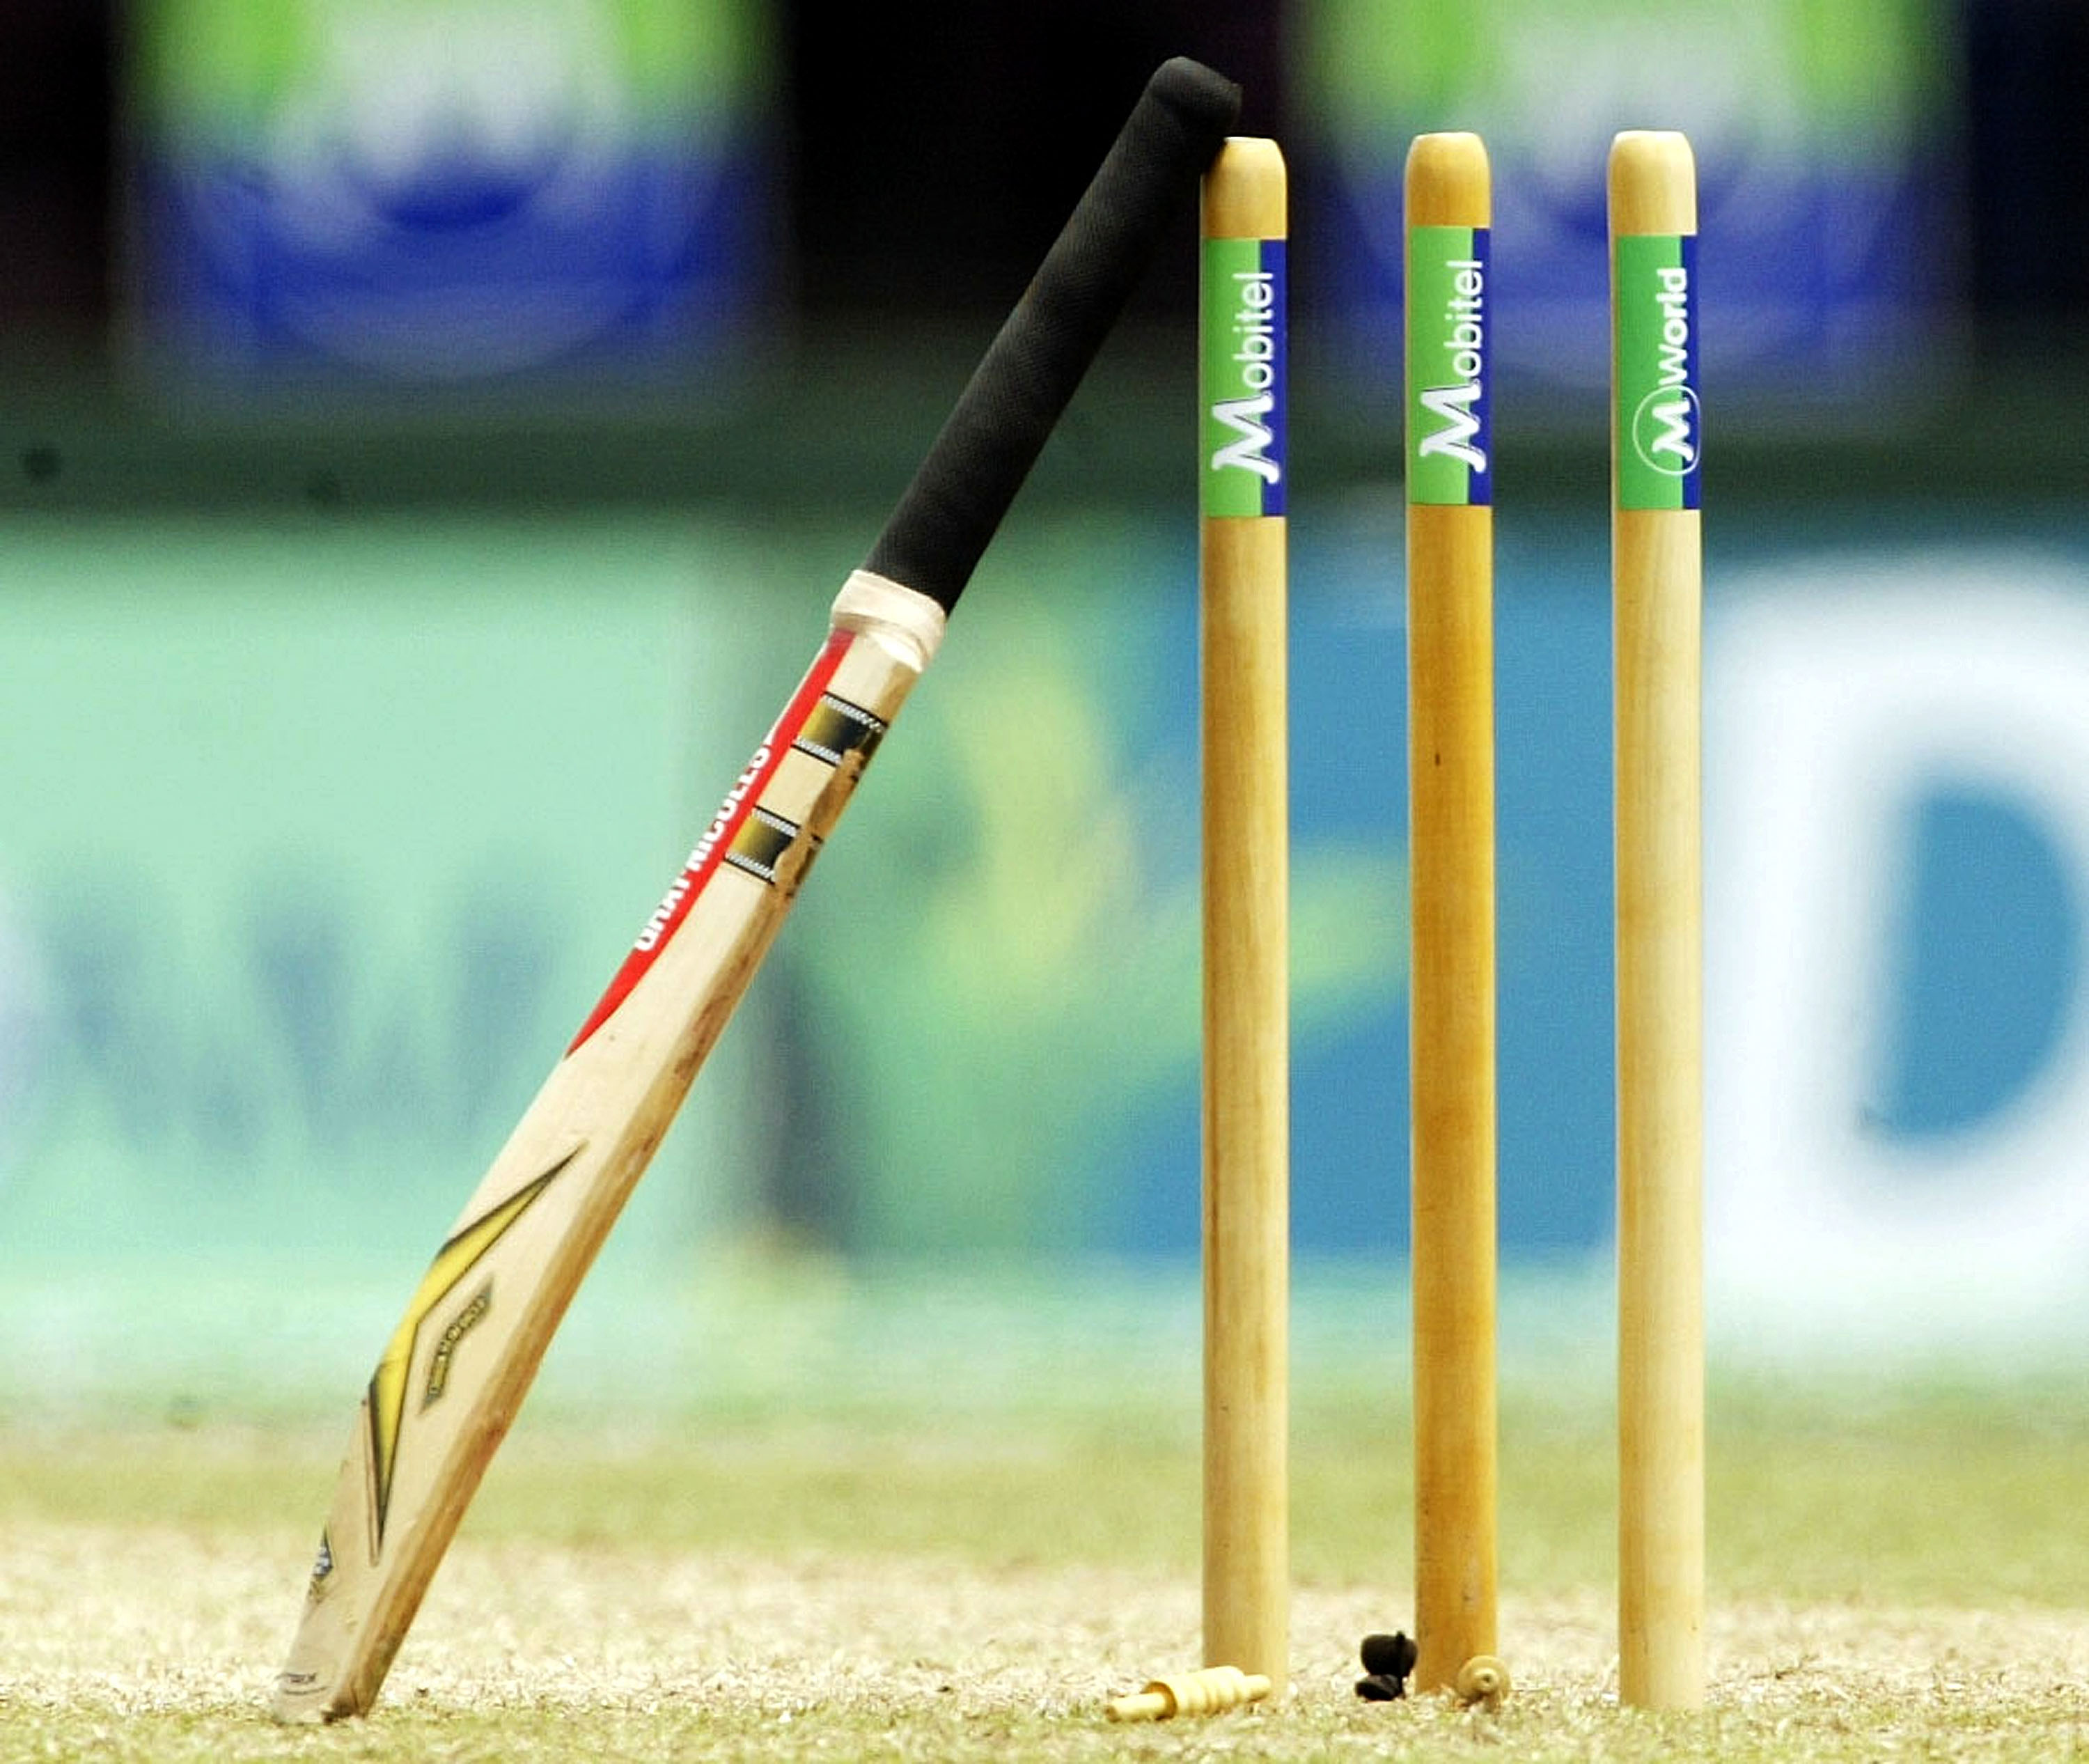 Ranji Trophy 2019-20 | Elite Group A - Gujarat sets up clash against Goa with easy win